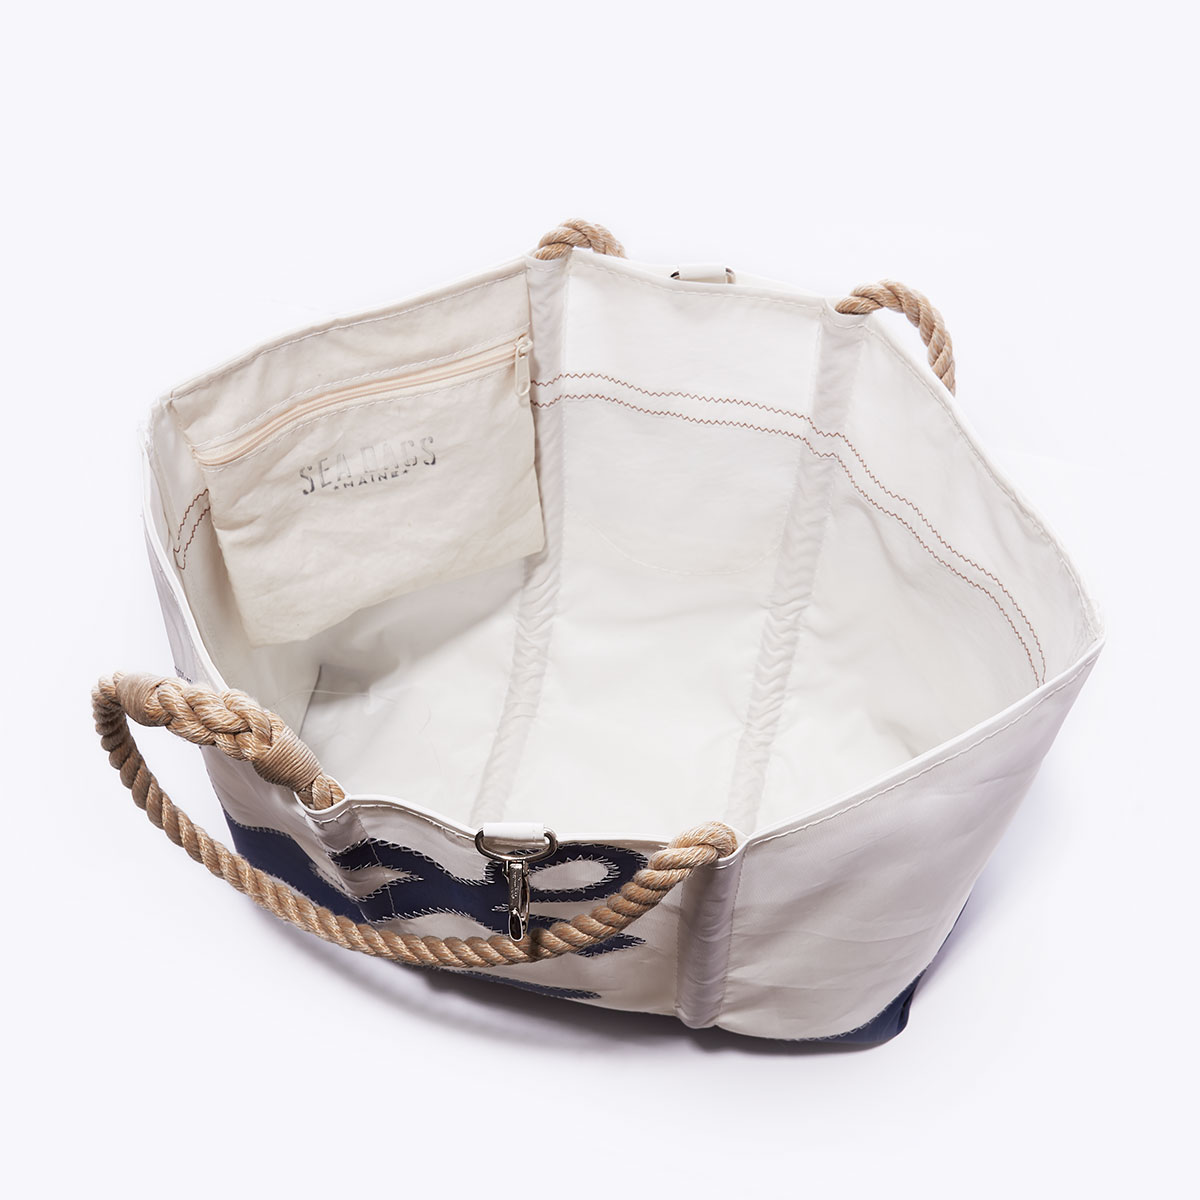 inside view of interior hanging pocket of the beach bag with a navy anchor sits left of center on a white recycled sail cloth tote with a navy bottom and hemp rope handles